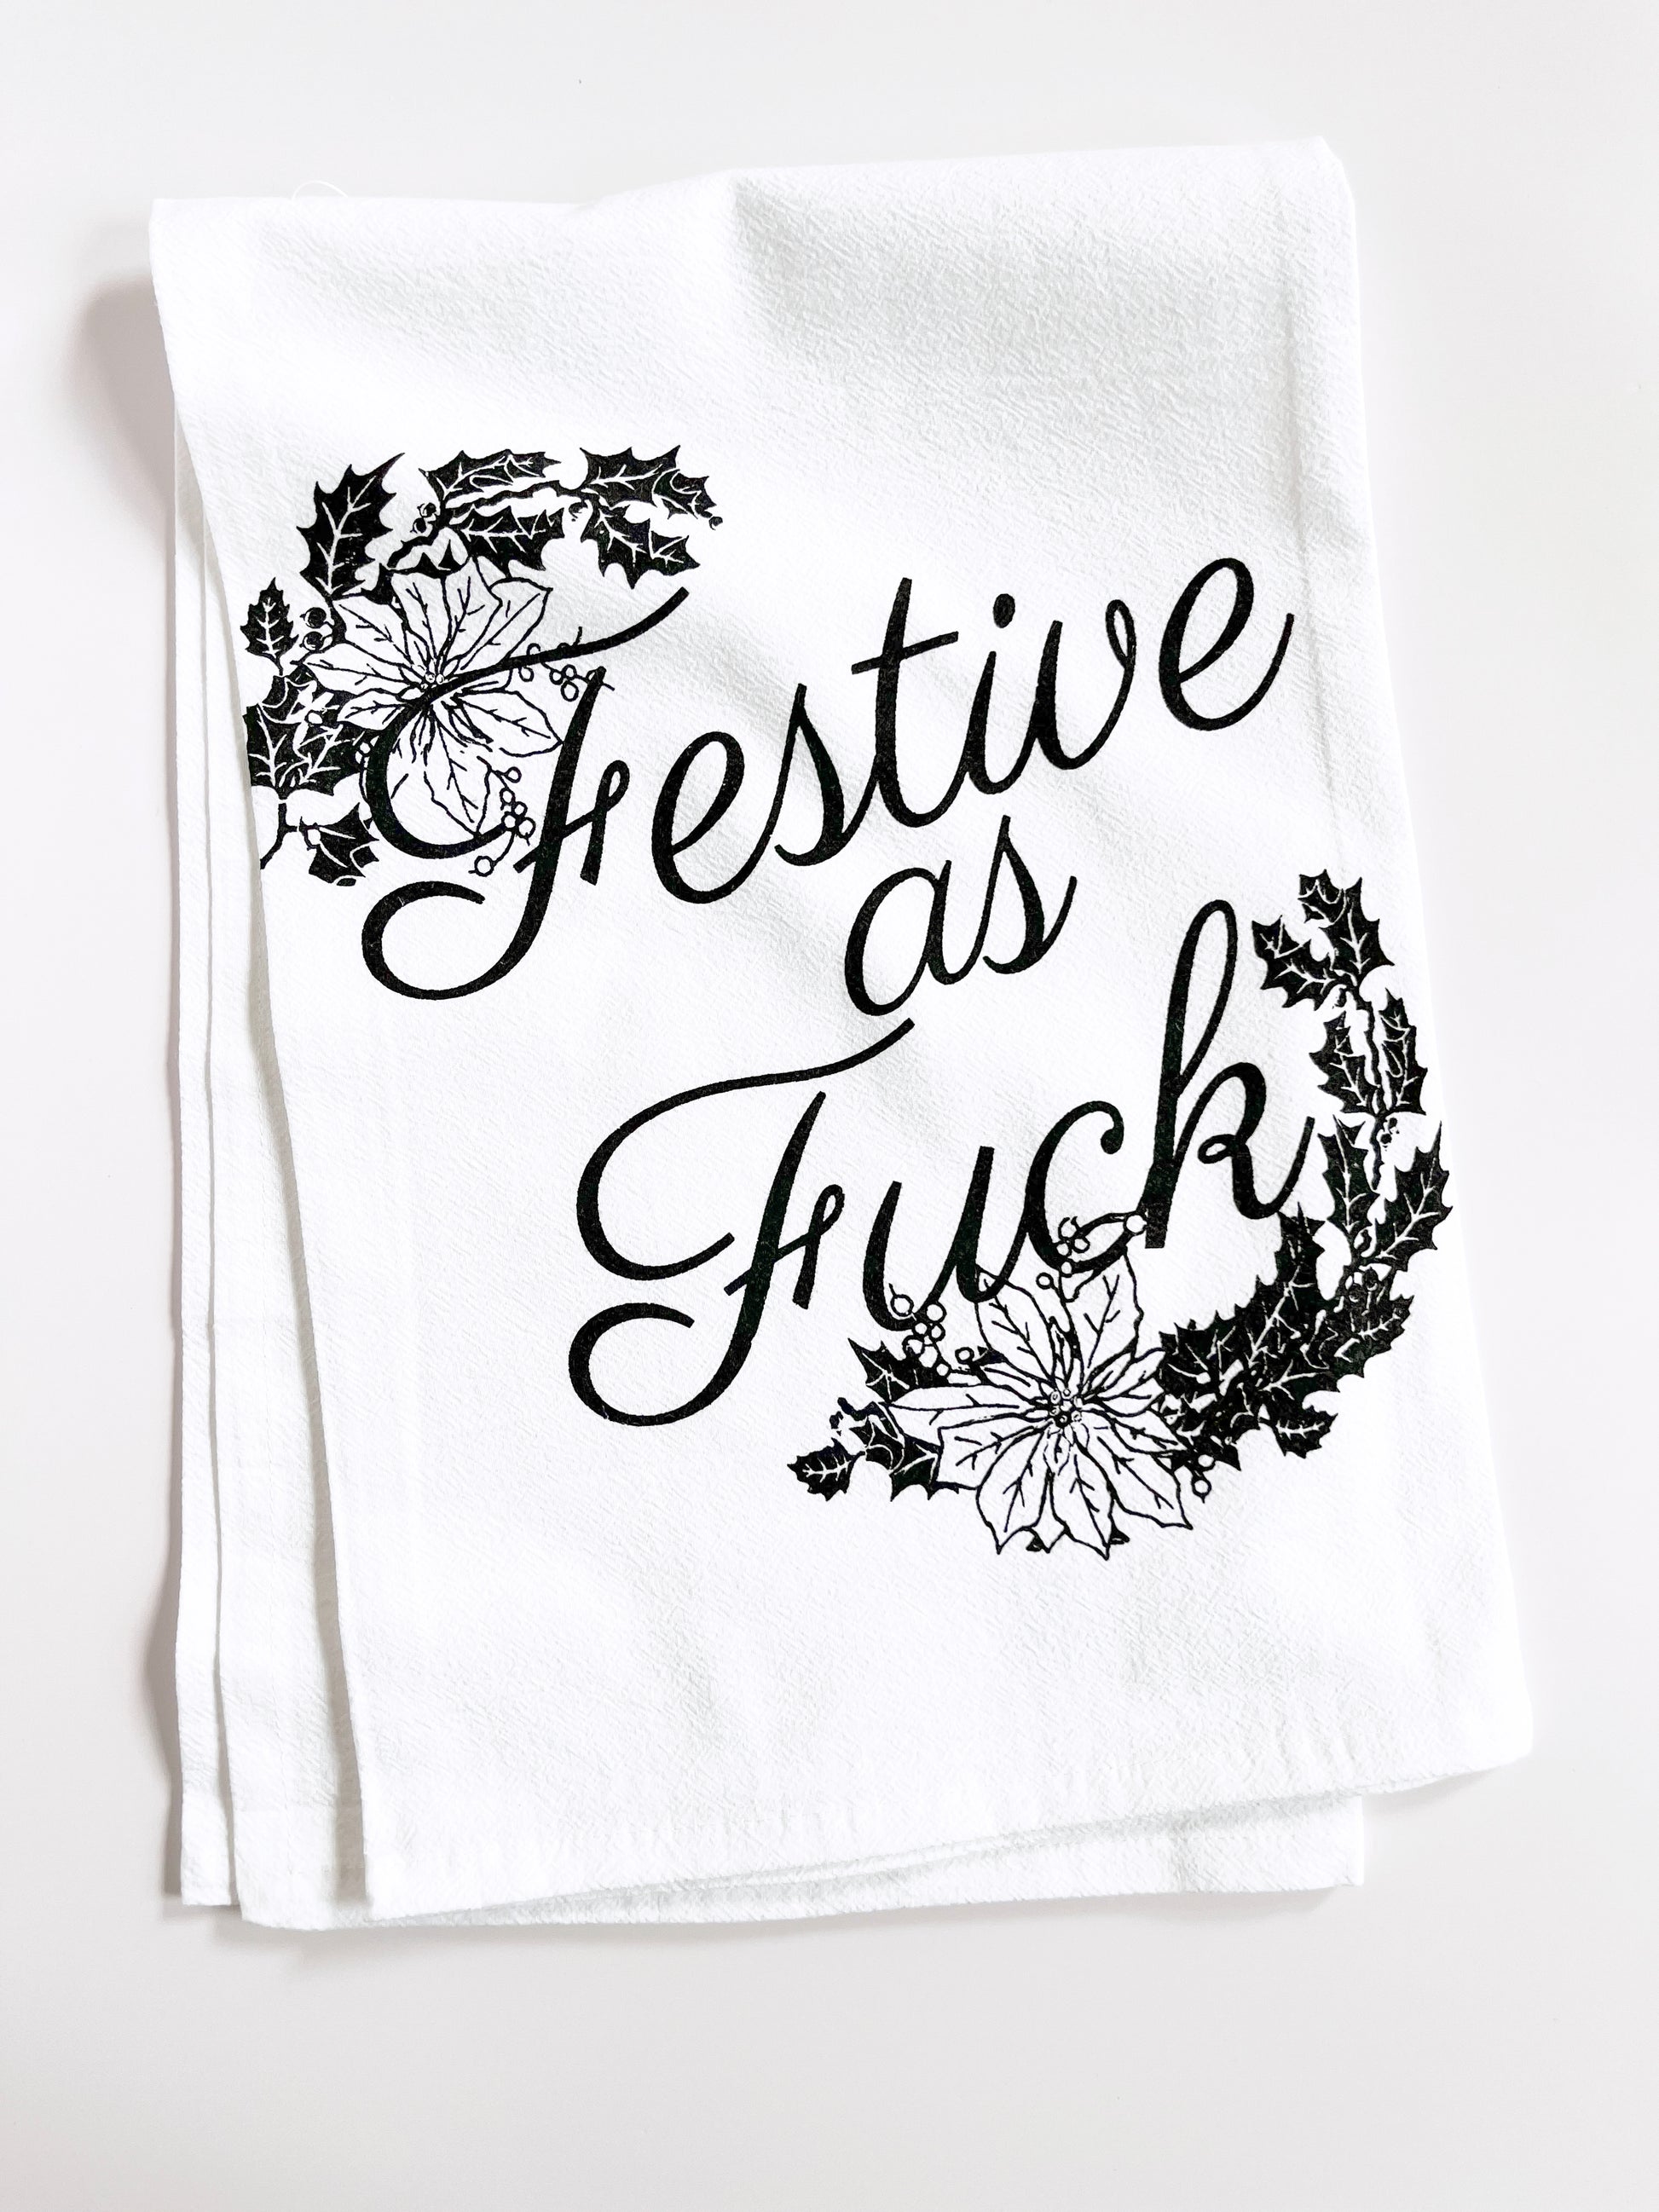 Funny, Absorbent Dish Towels That Match Your Kitchen Theme. Bring